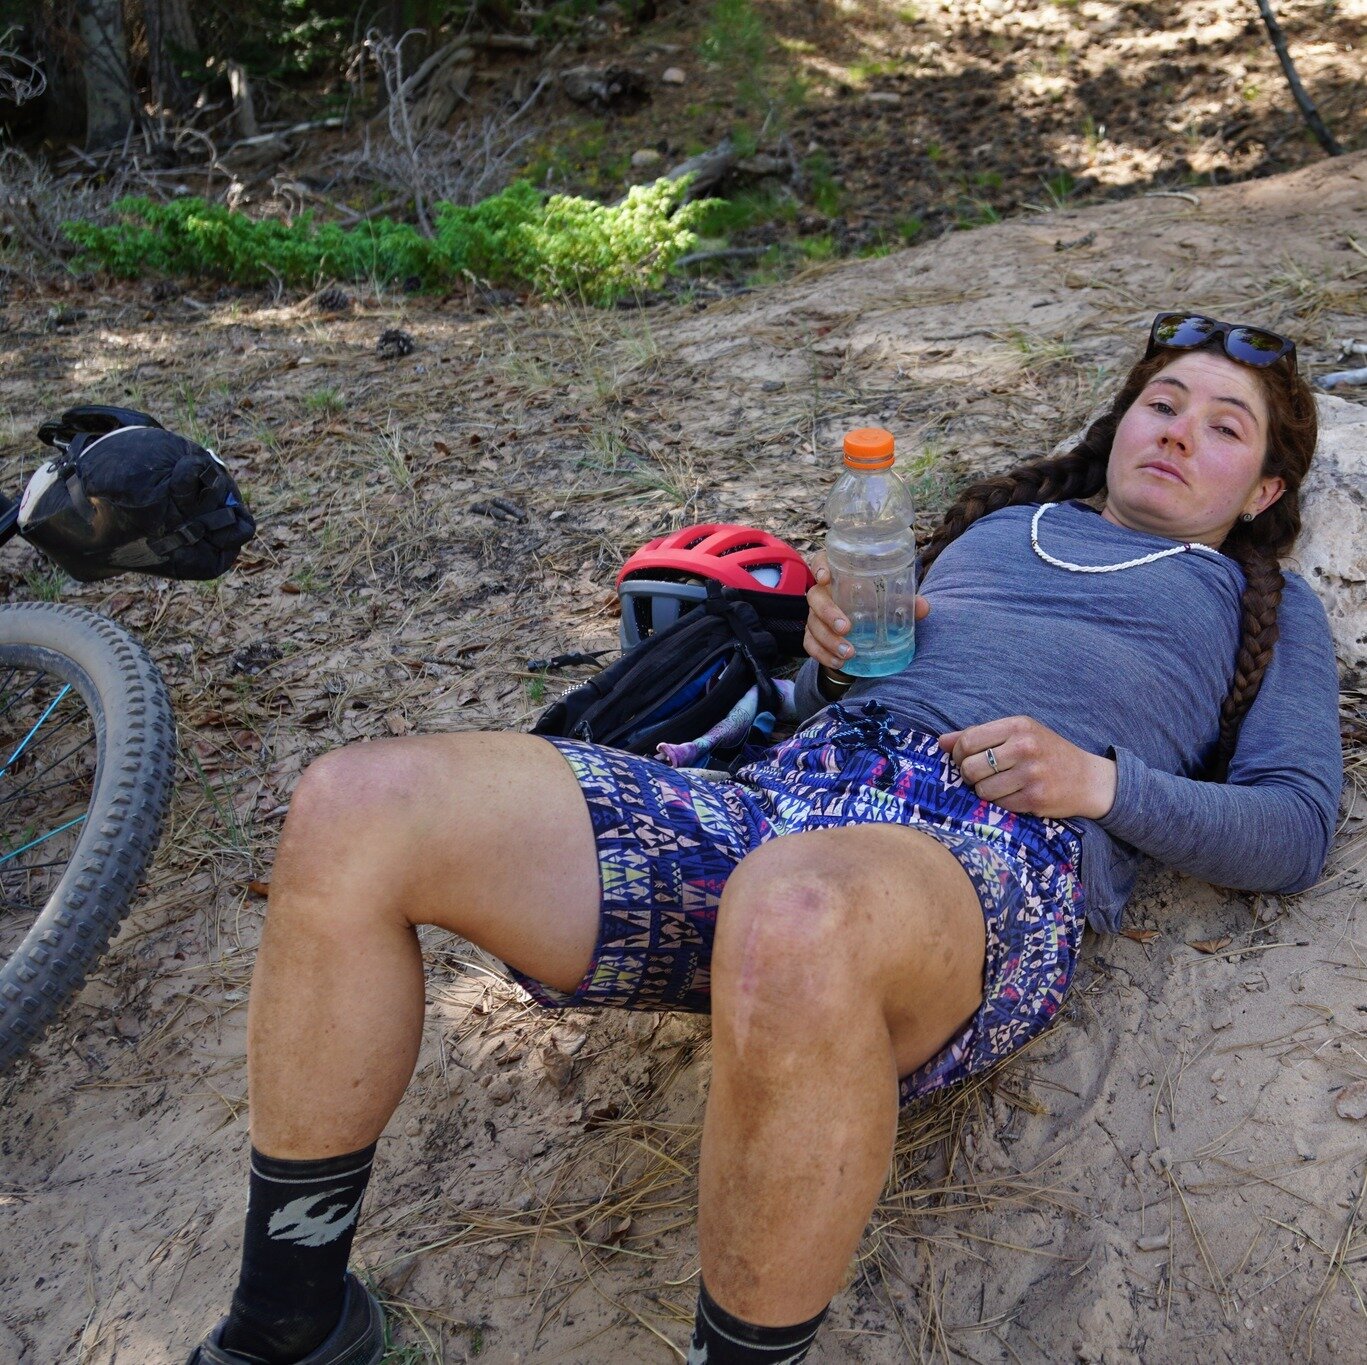 Have you ever felt like this? Or that? (ie - completely bonked, flattened, and demoralized and wishing you could teleport yourself out of &quot;the middle of nowhere&quot; to be done with the bikepacking trip? vs, feeling incredibly inspired and invi